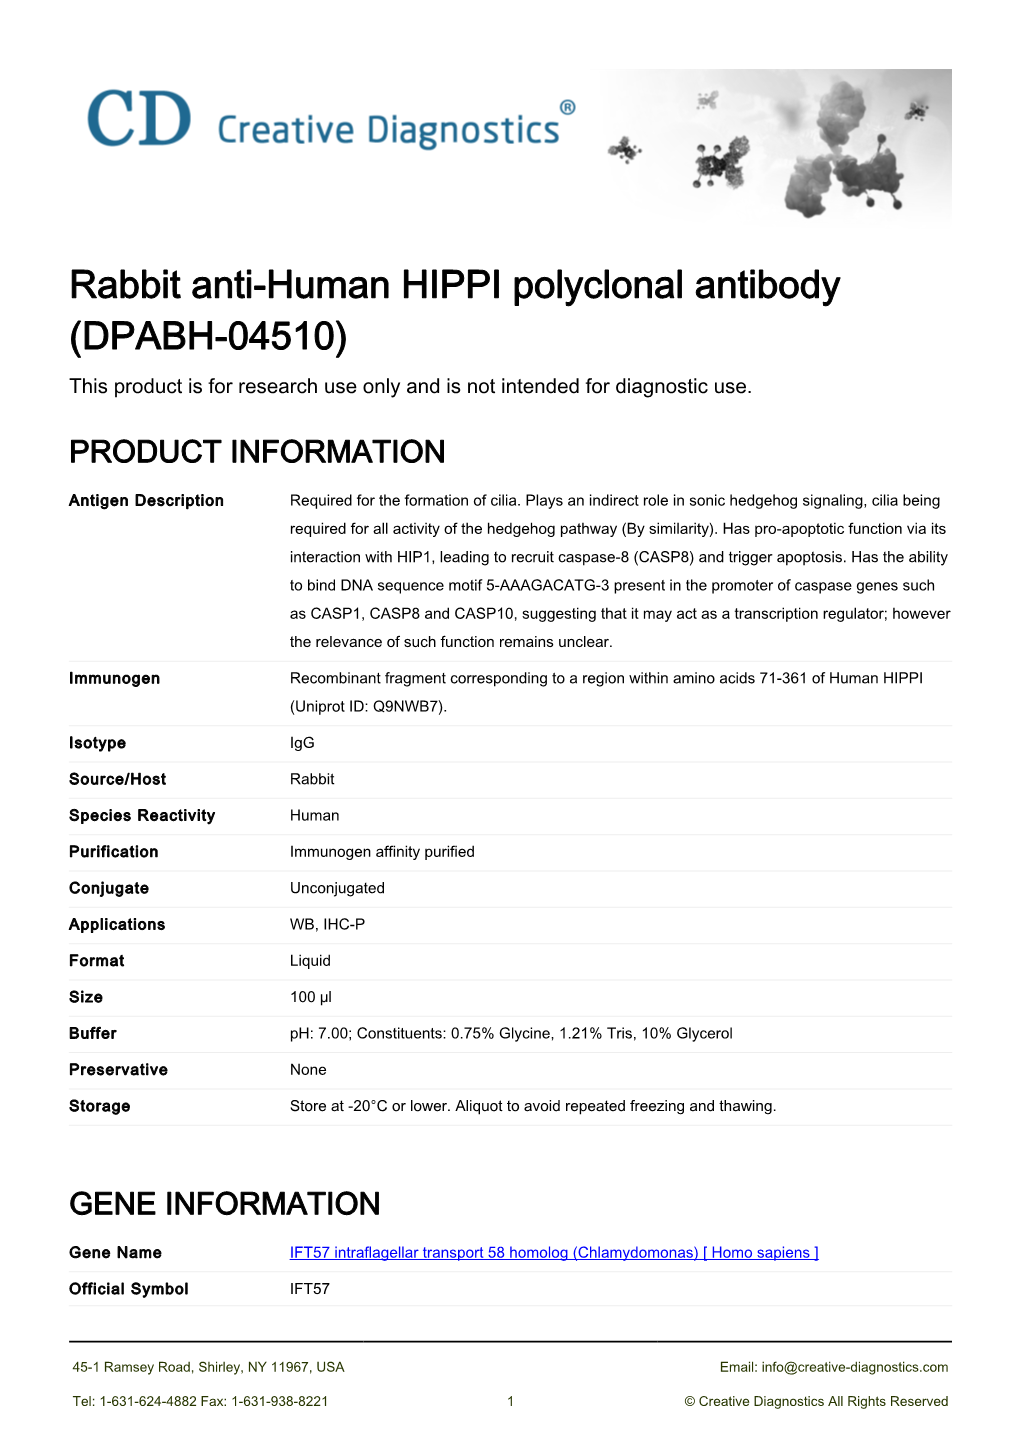 Rabbit Anti-Human HIPPI Polyclonal Antibody (DPABH-04510) This Product Is for Research Use Only and Is Not Intended for Diagnostic Use